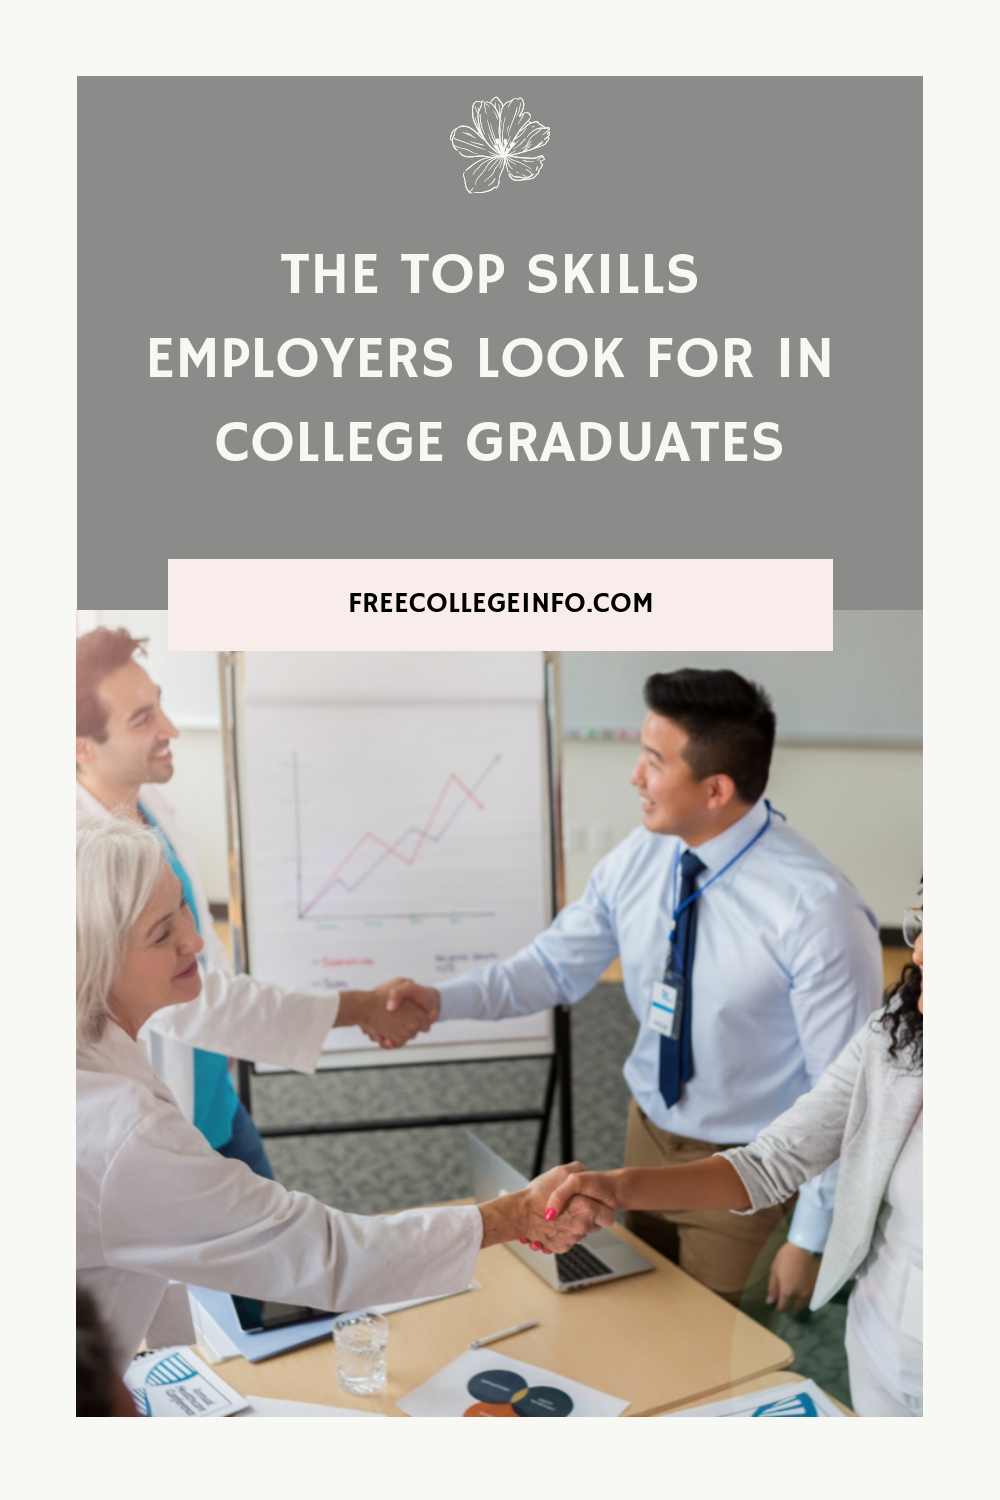 Top Skills Employers Look For in College Graduates